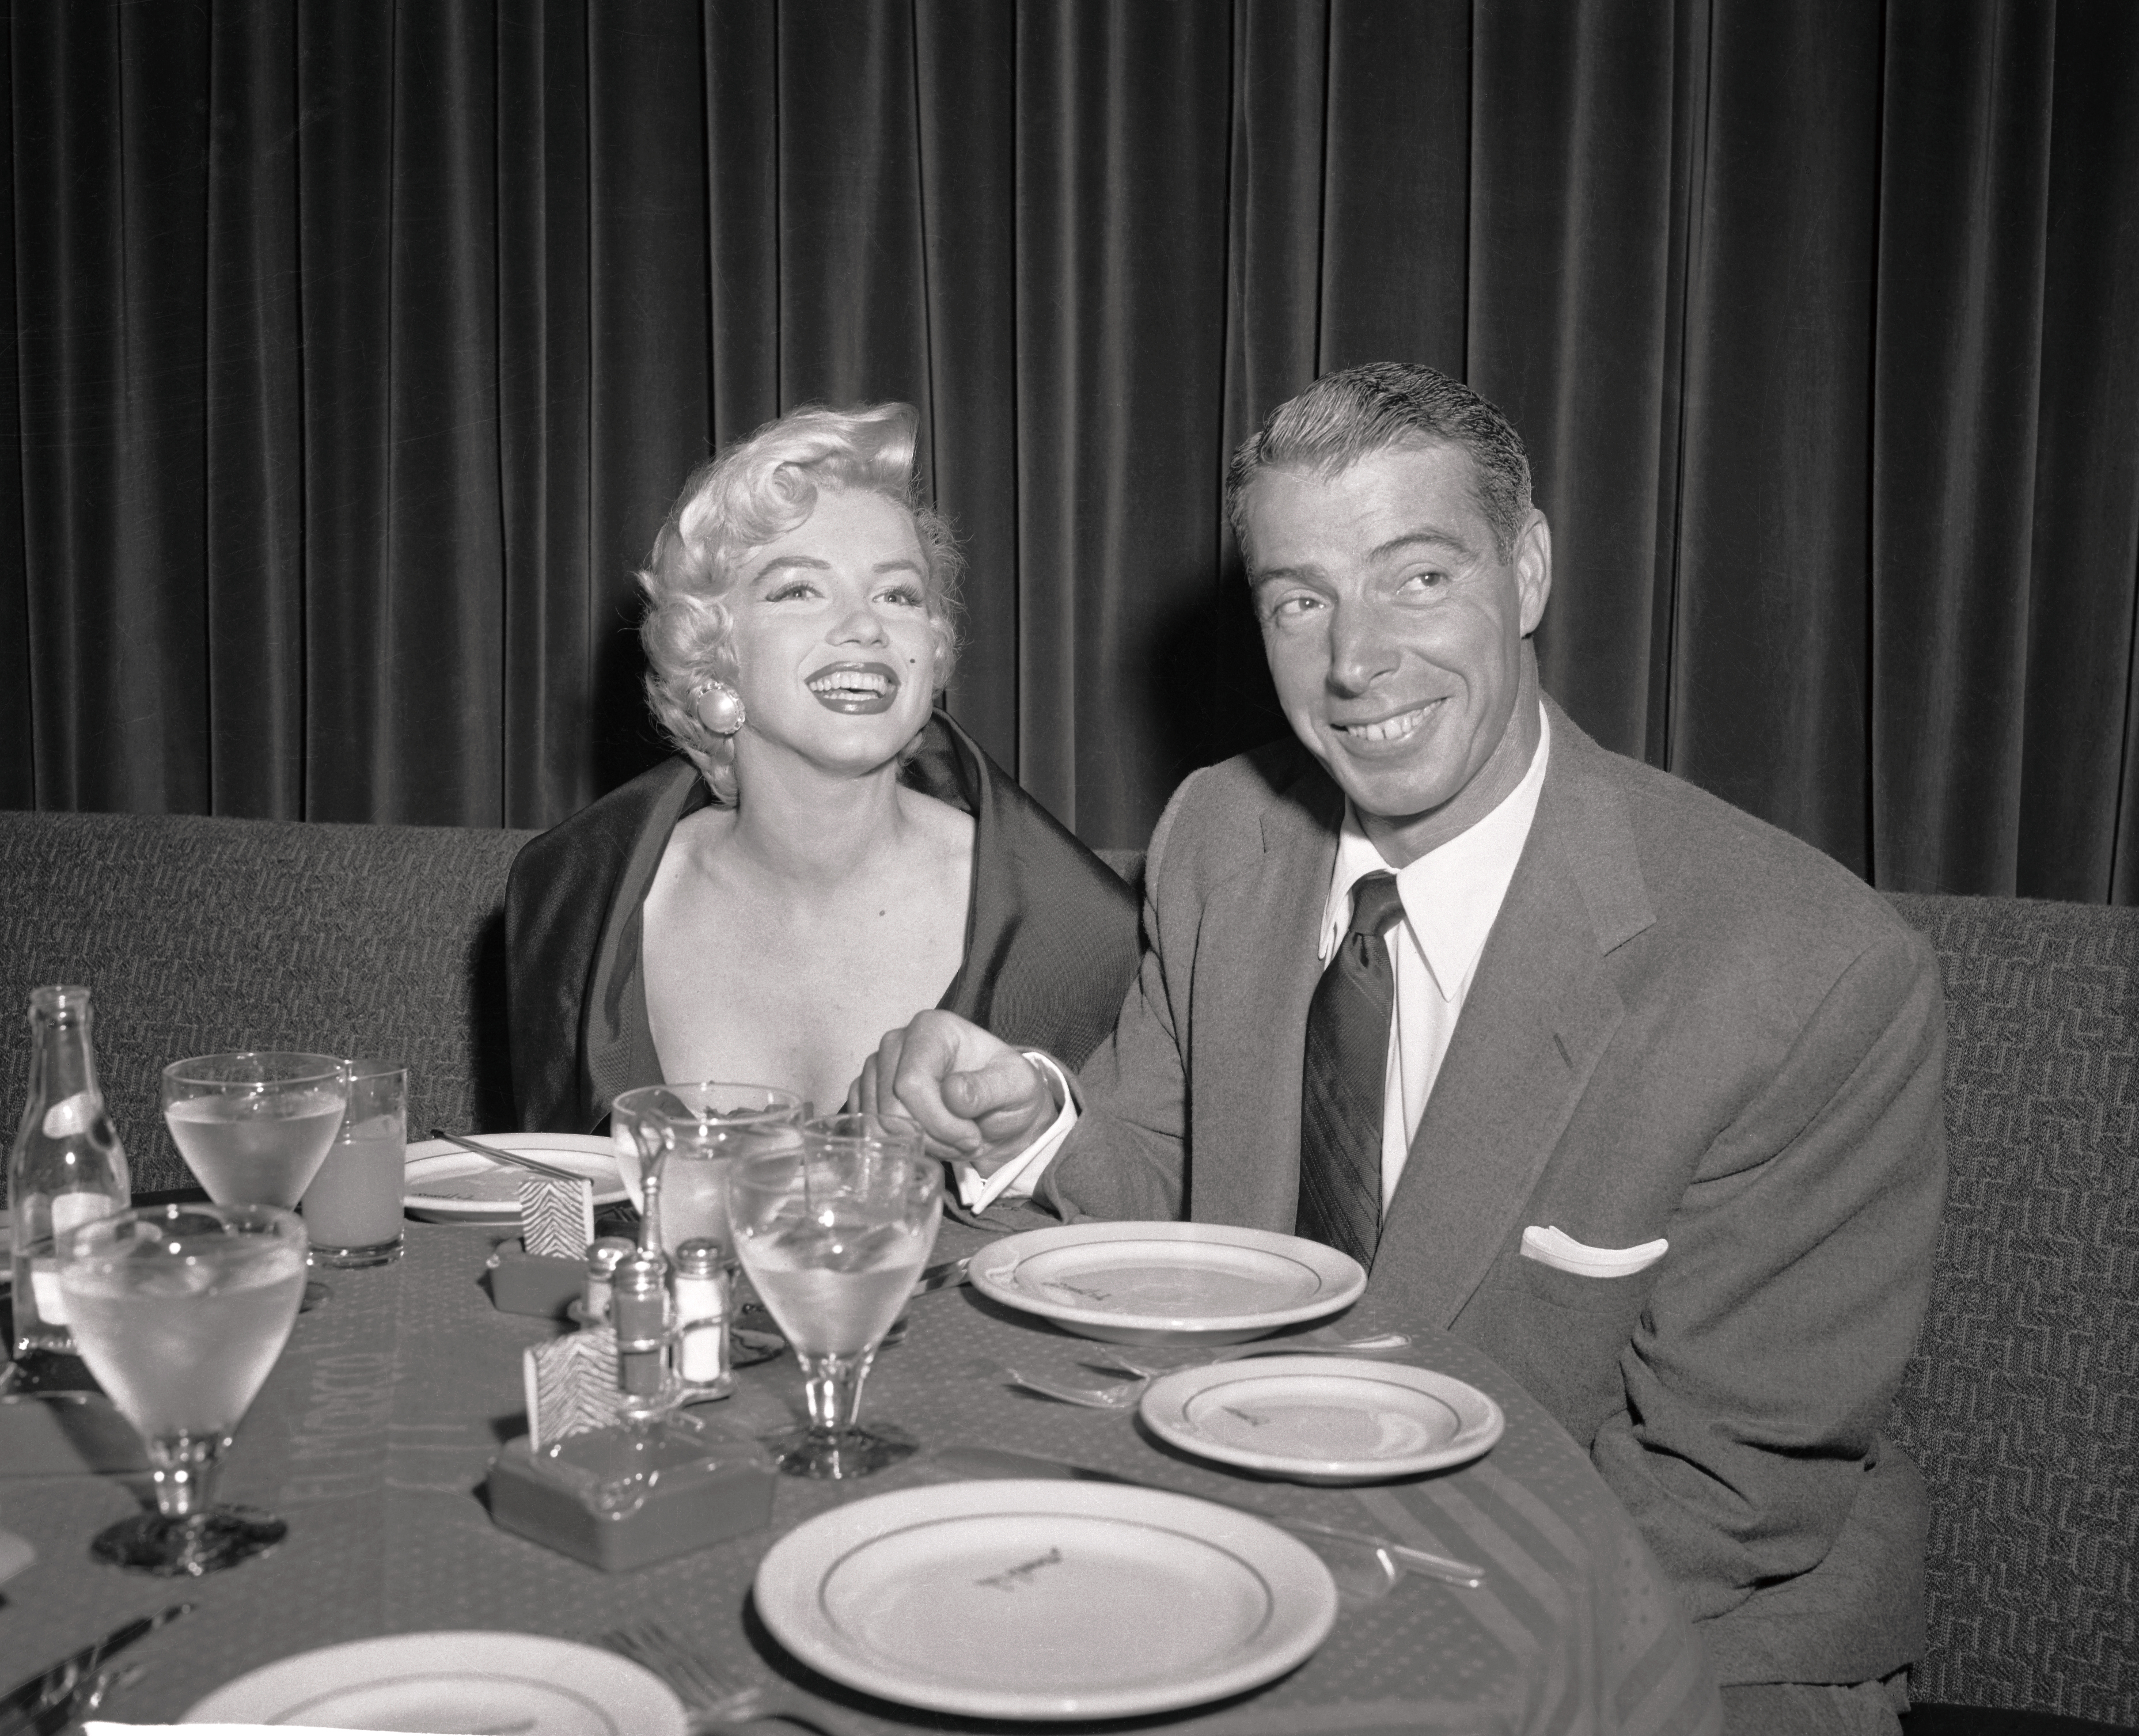 Joe DiMaggio Never Got Over His Tragic Infatuation With Marilyn